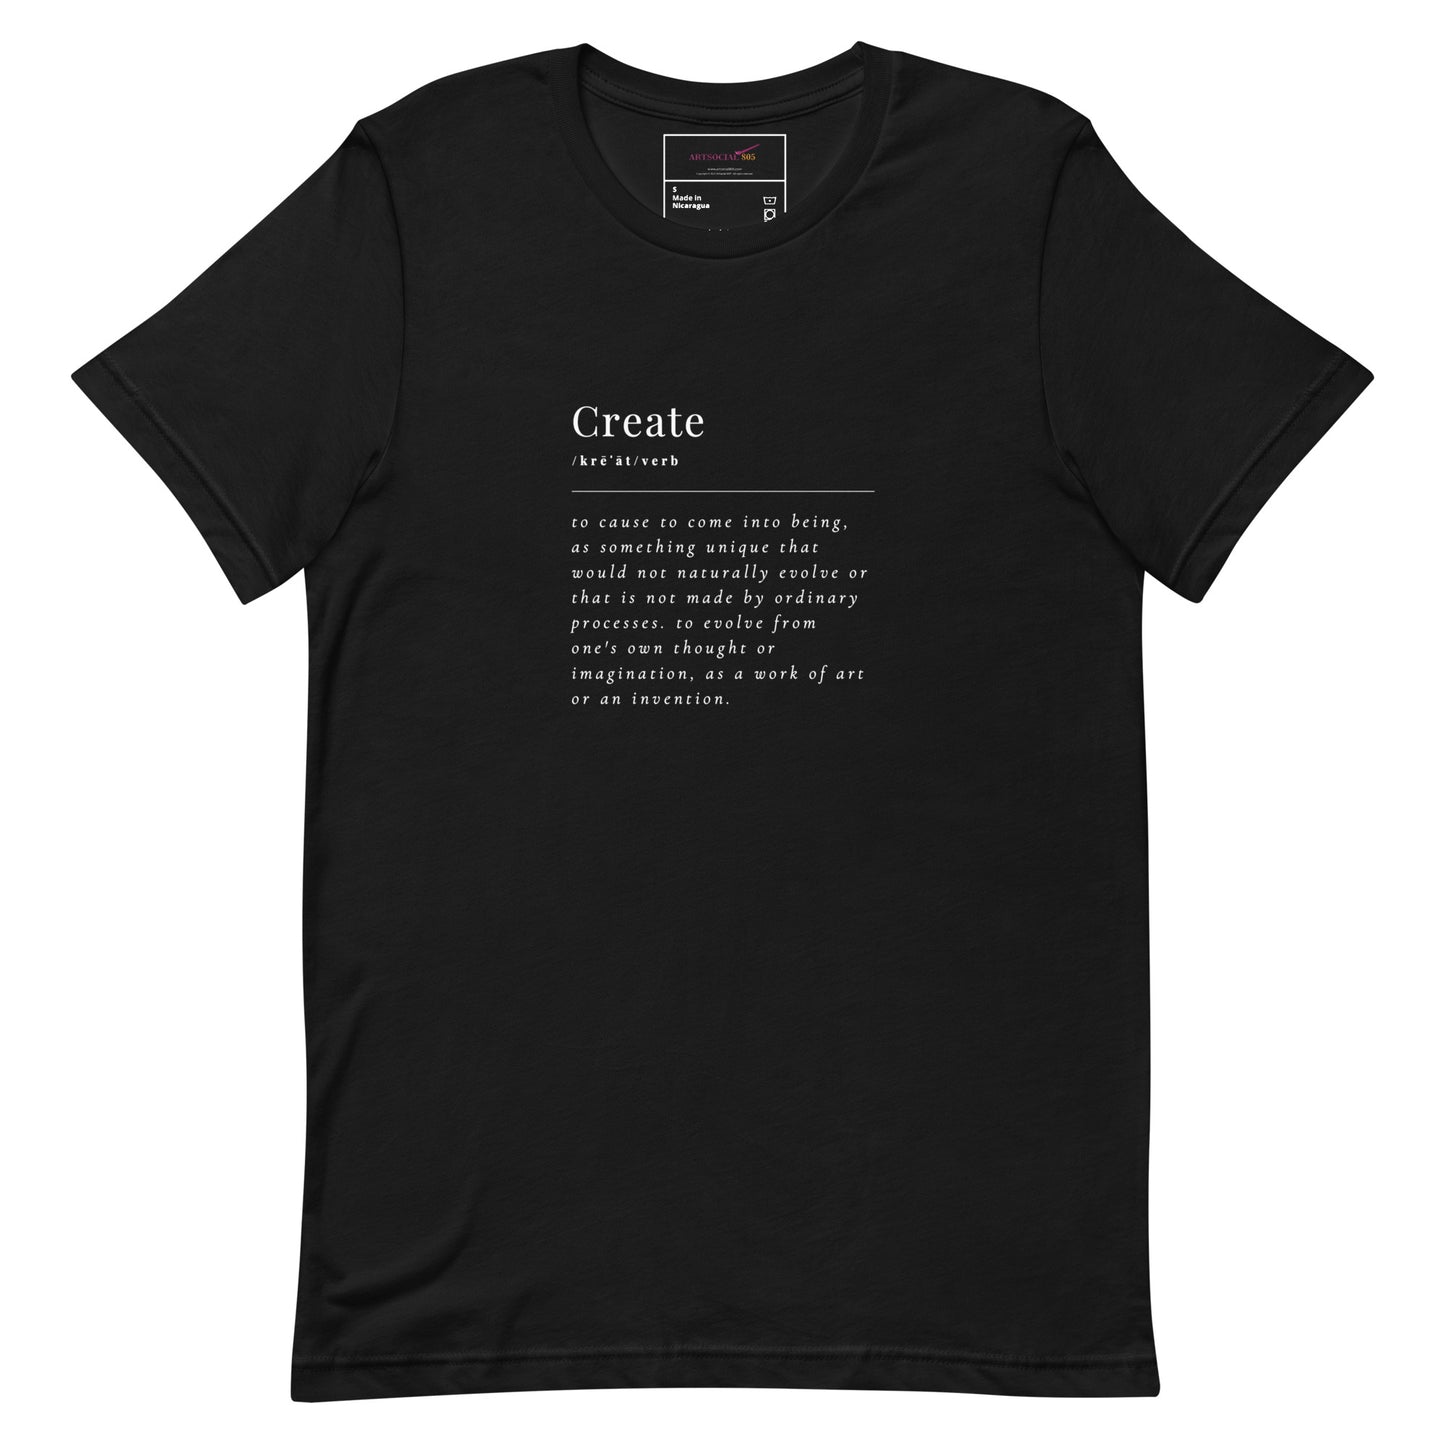 Definition of “Create” T-shirt